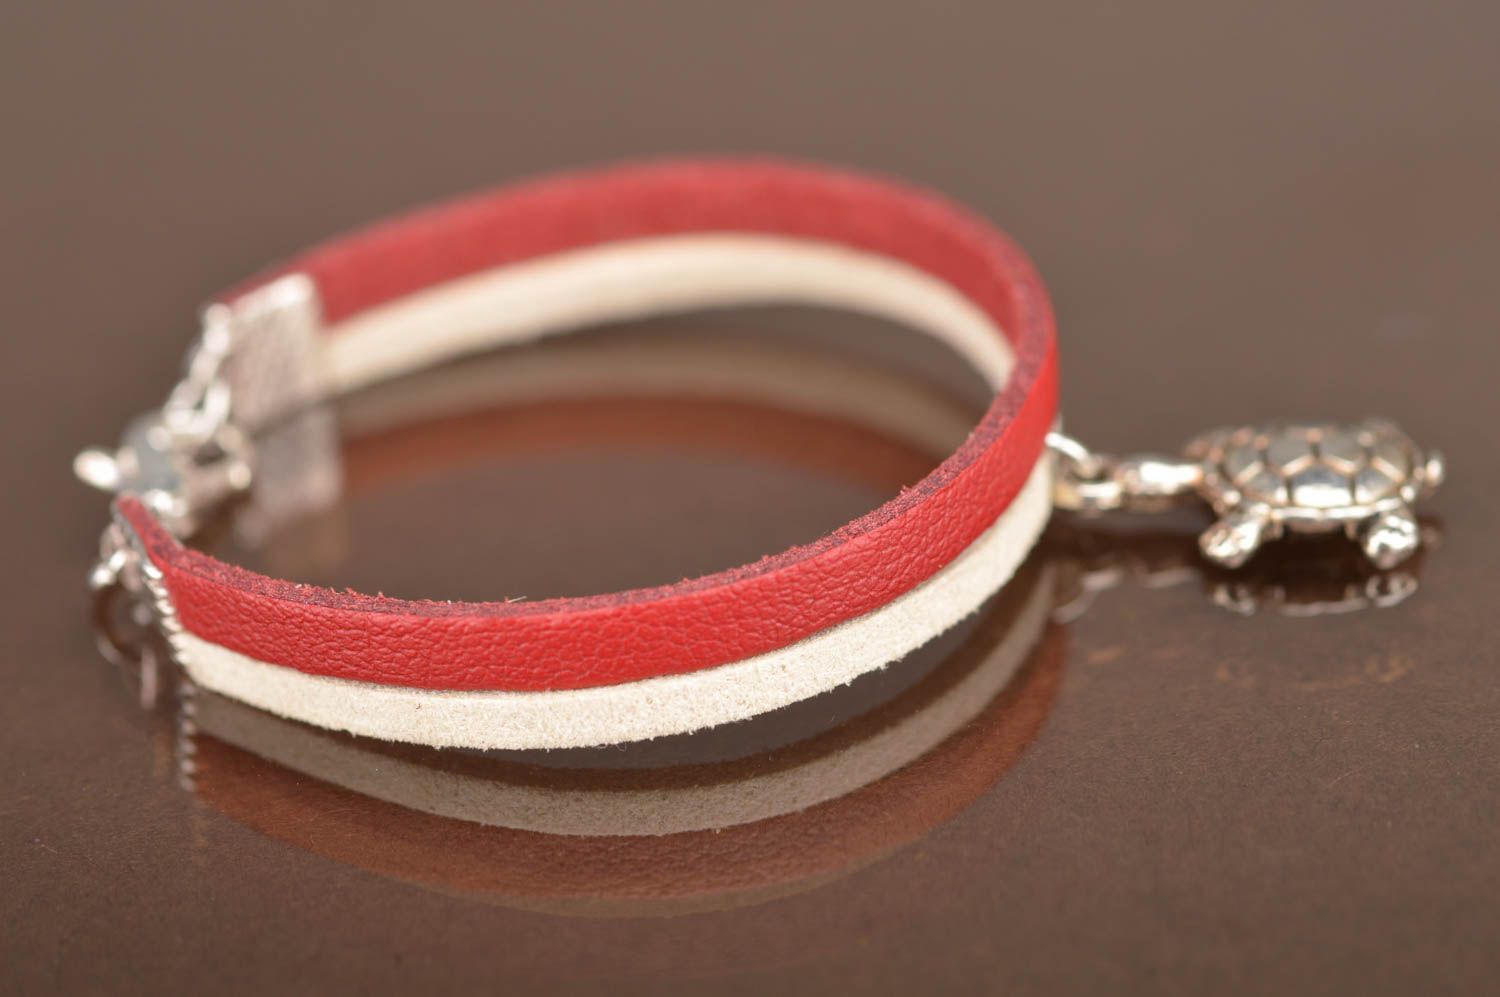 Handmade red and white leather wrist bracelet with turtle charm for kids photo 5